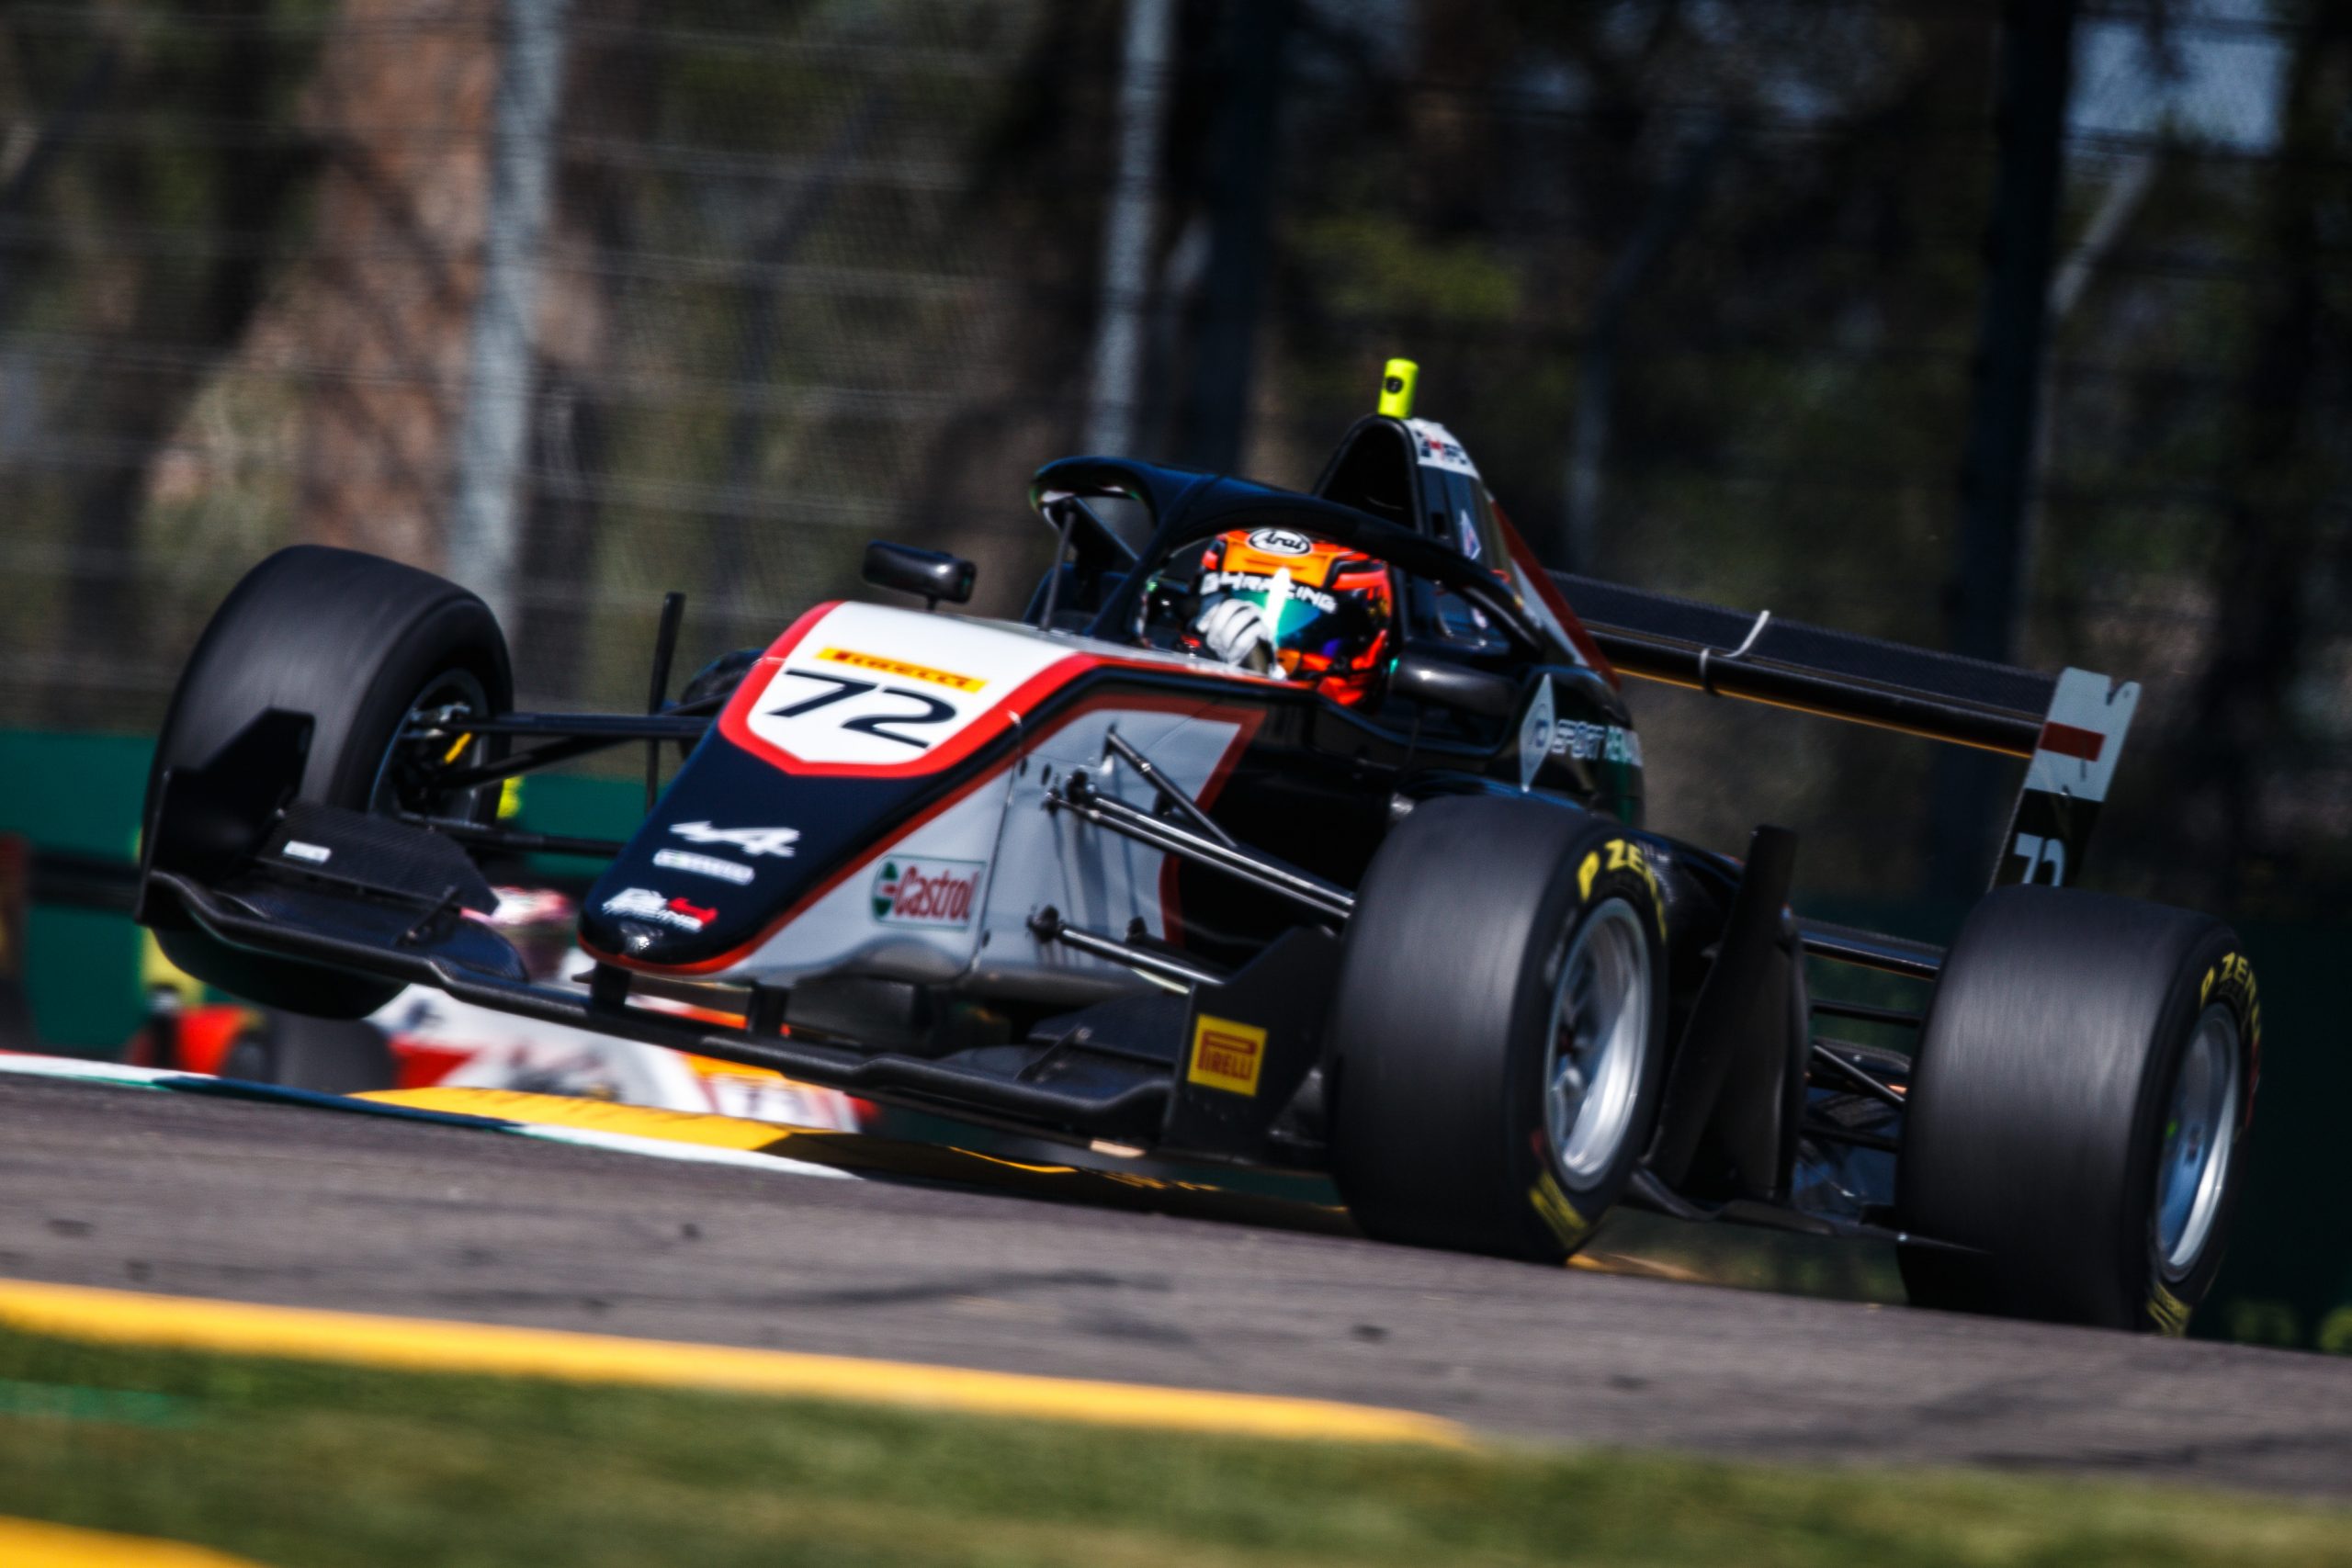 G4 Racing delivers brilliant performance in Imola Race 2